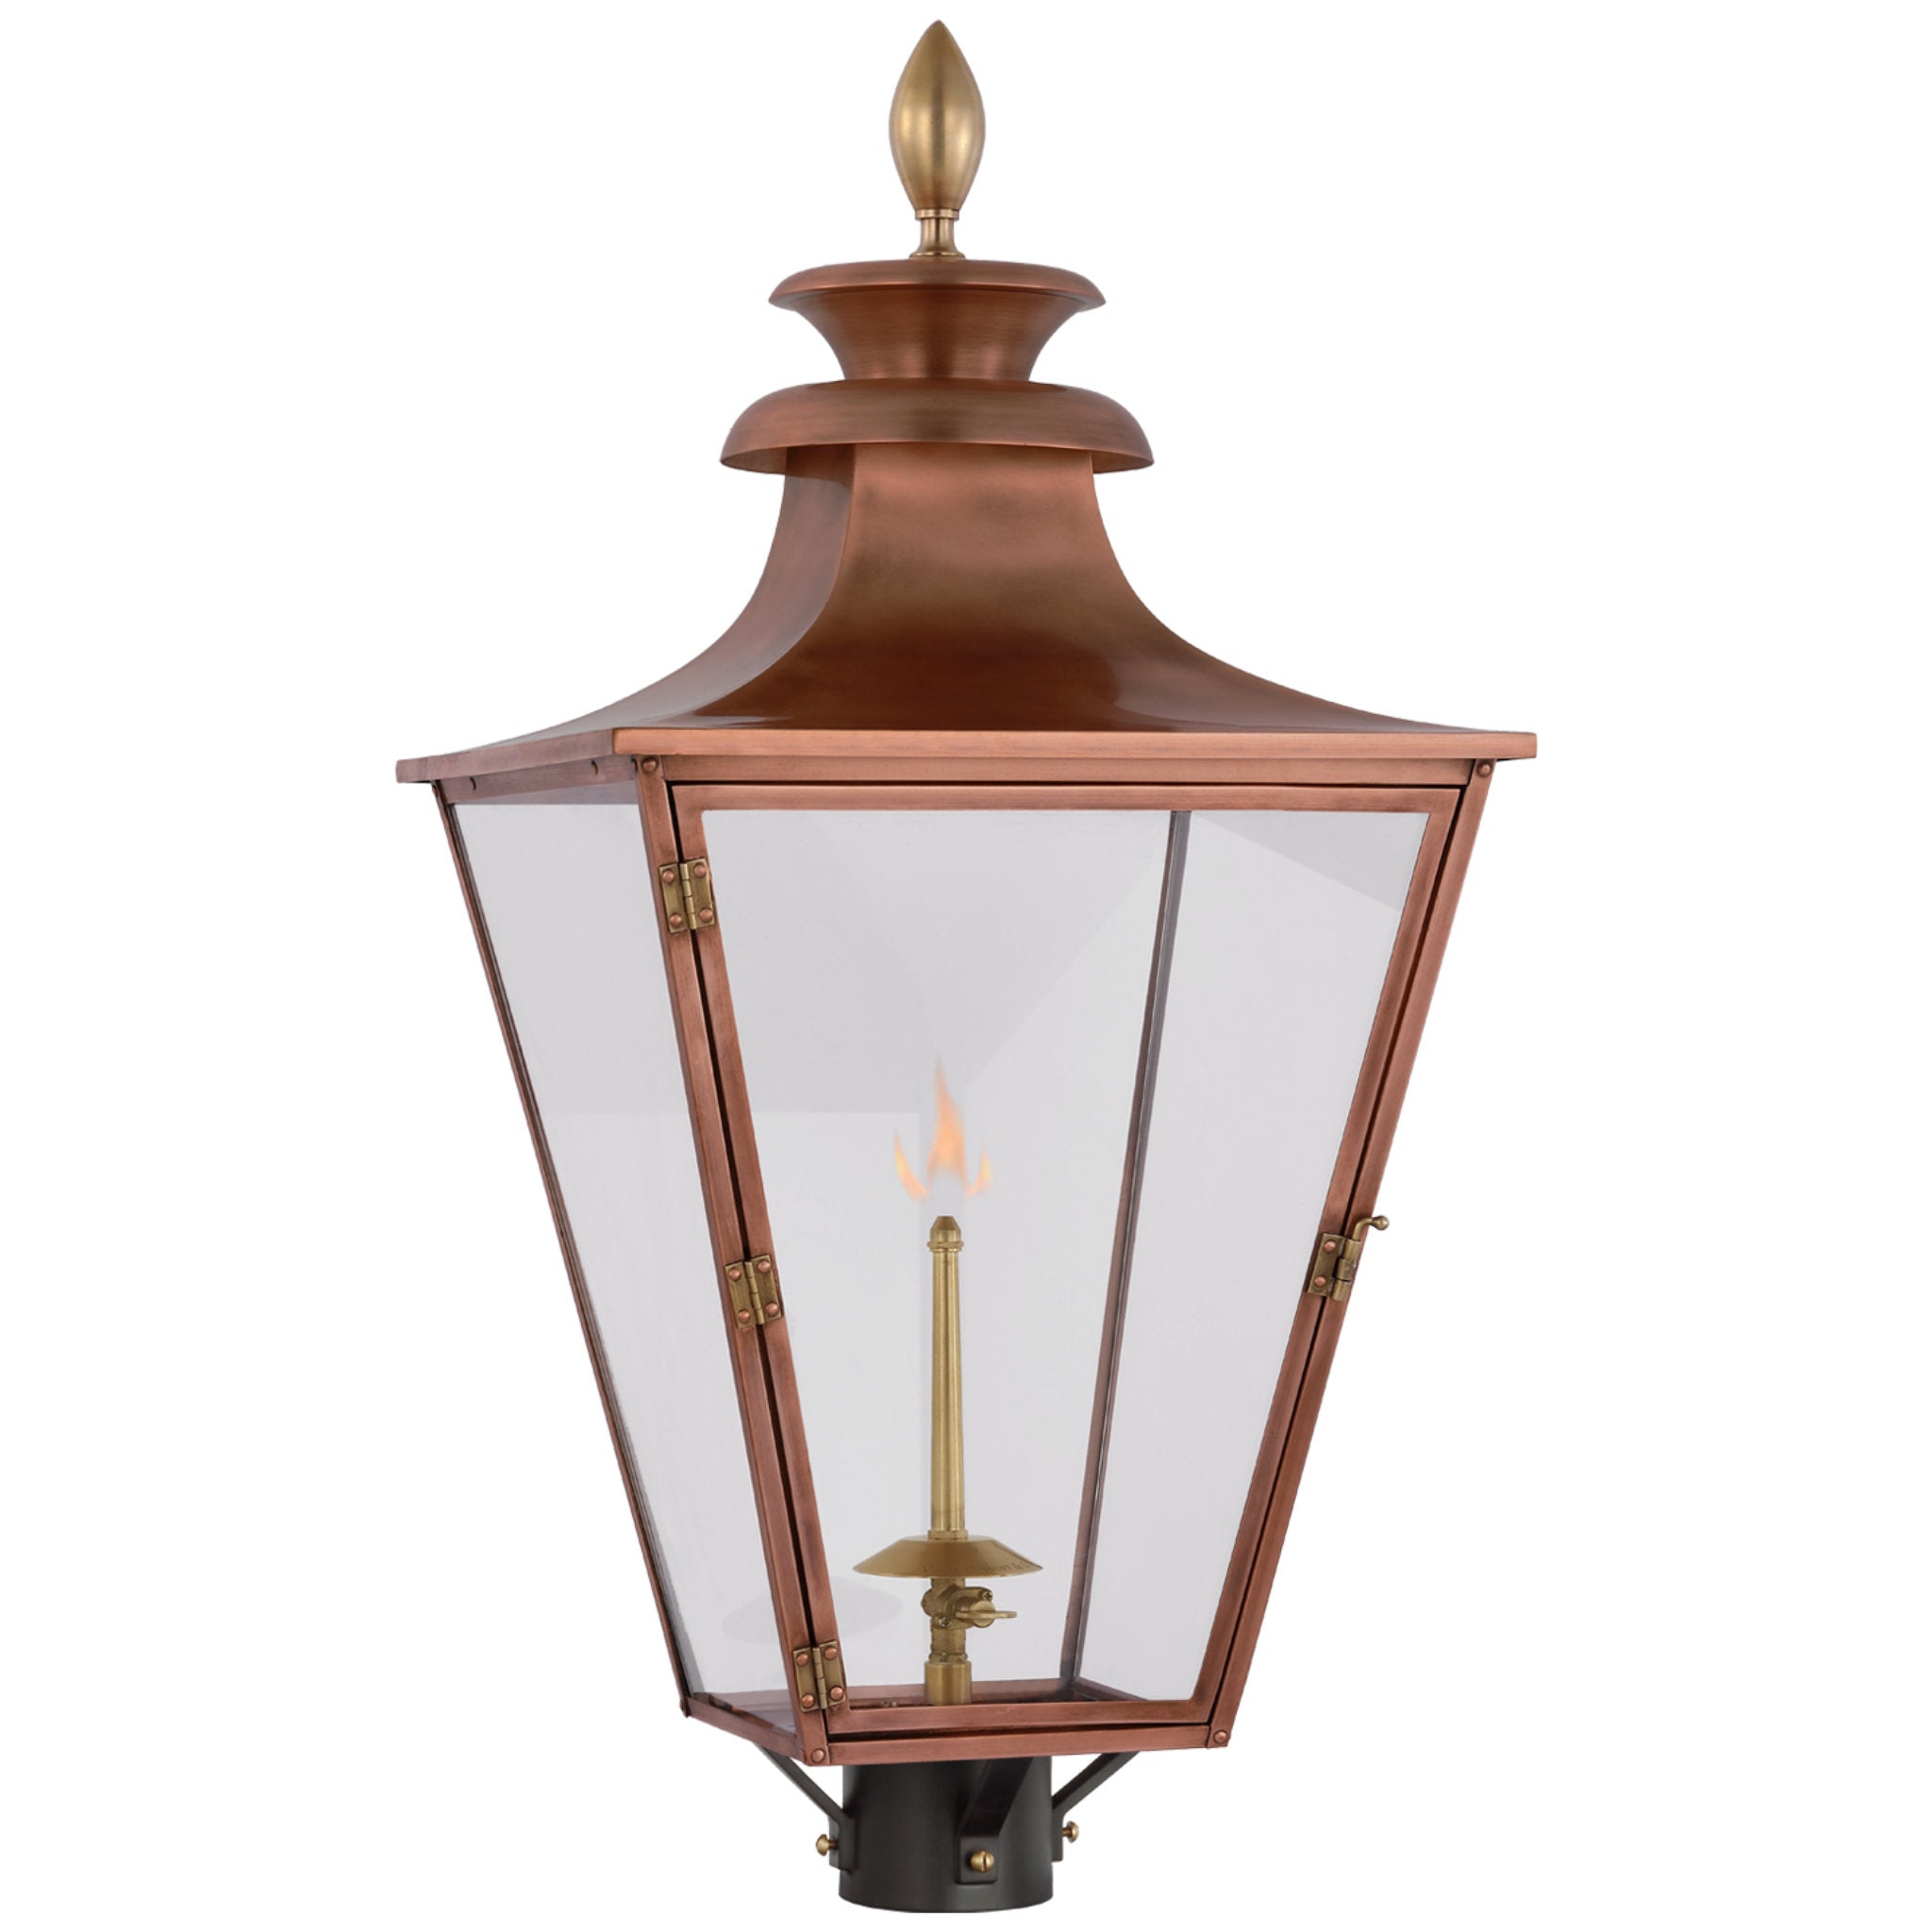 Chapman & Myers Albermarle Gas Post Light in Soft Copper and Brass with Clear Glass